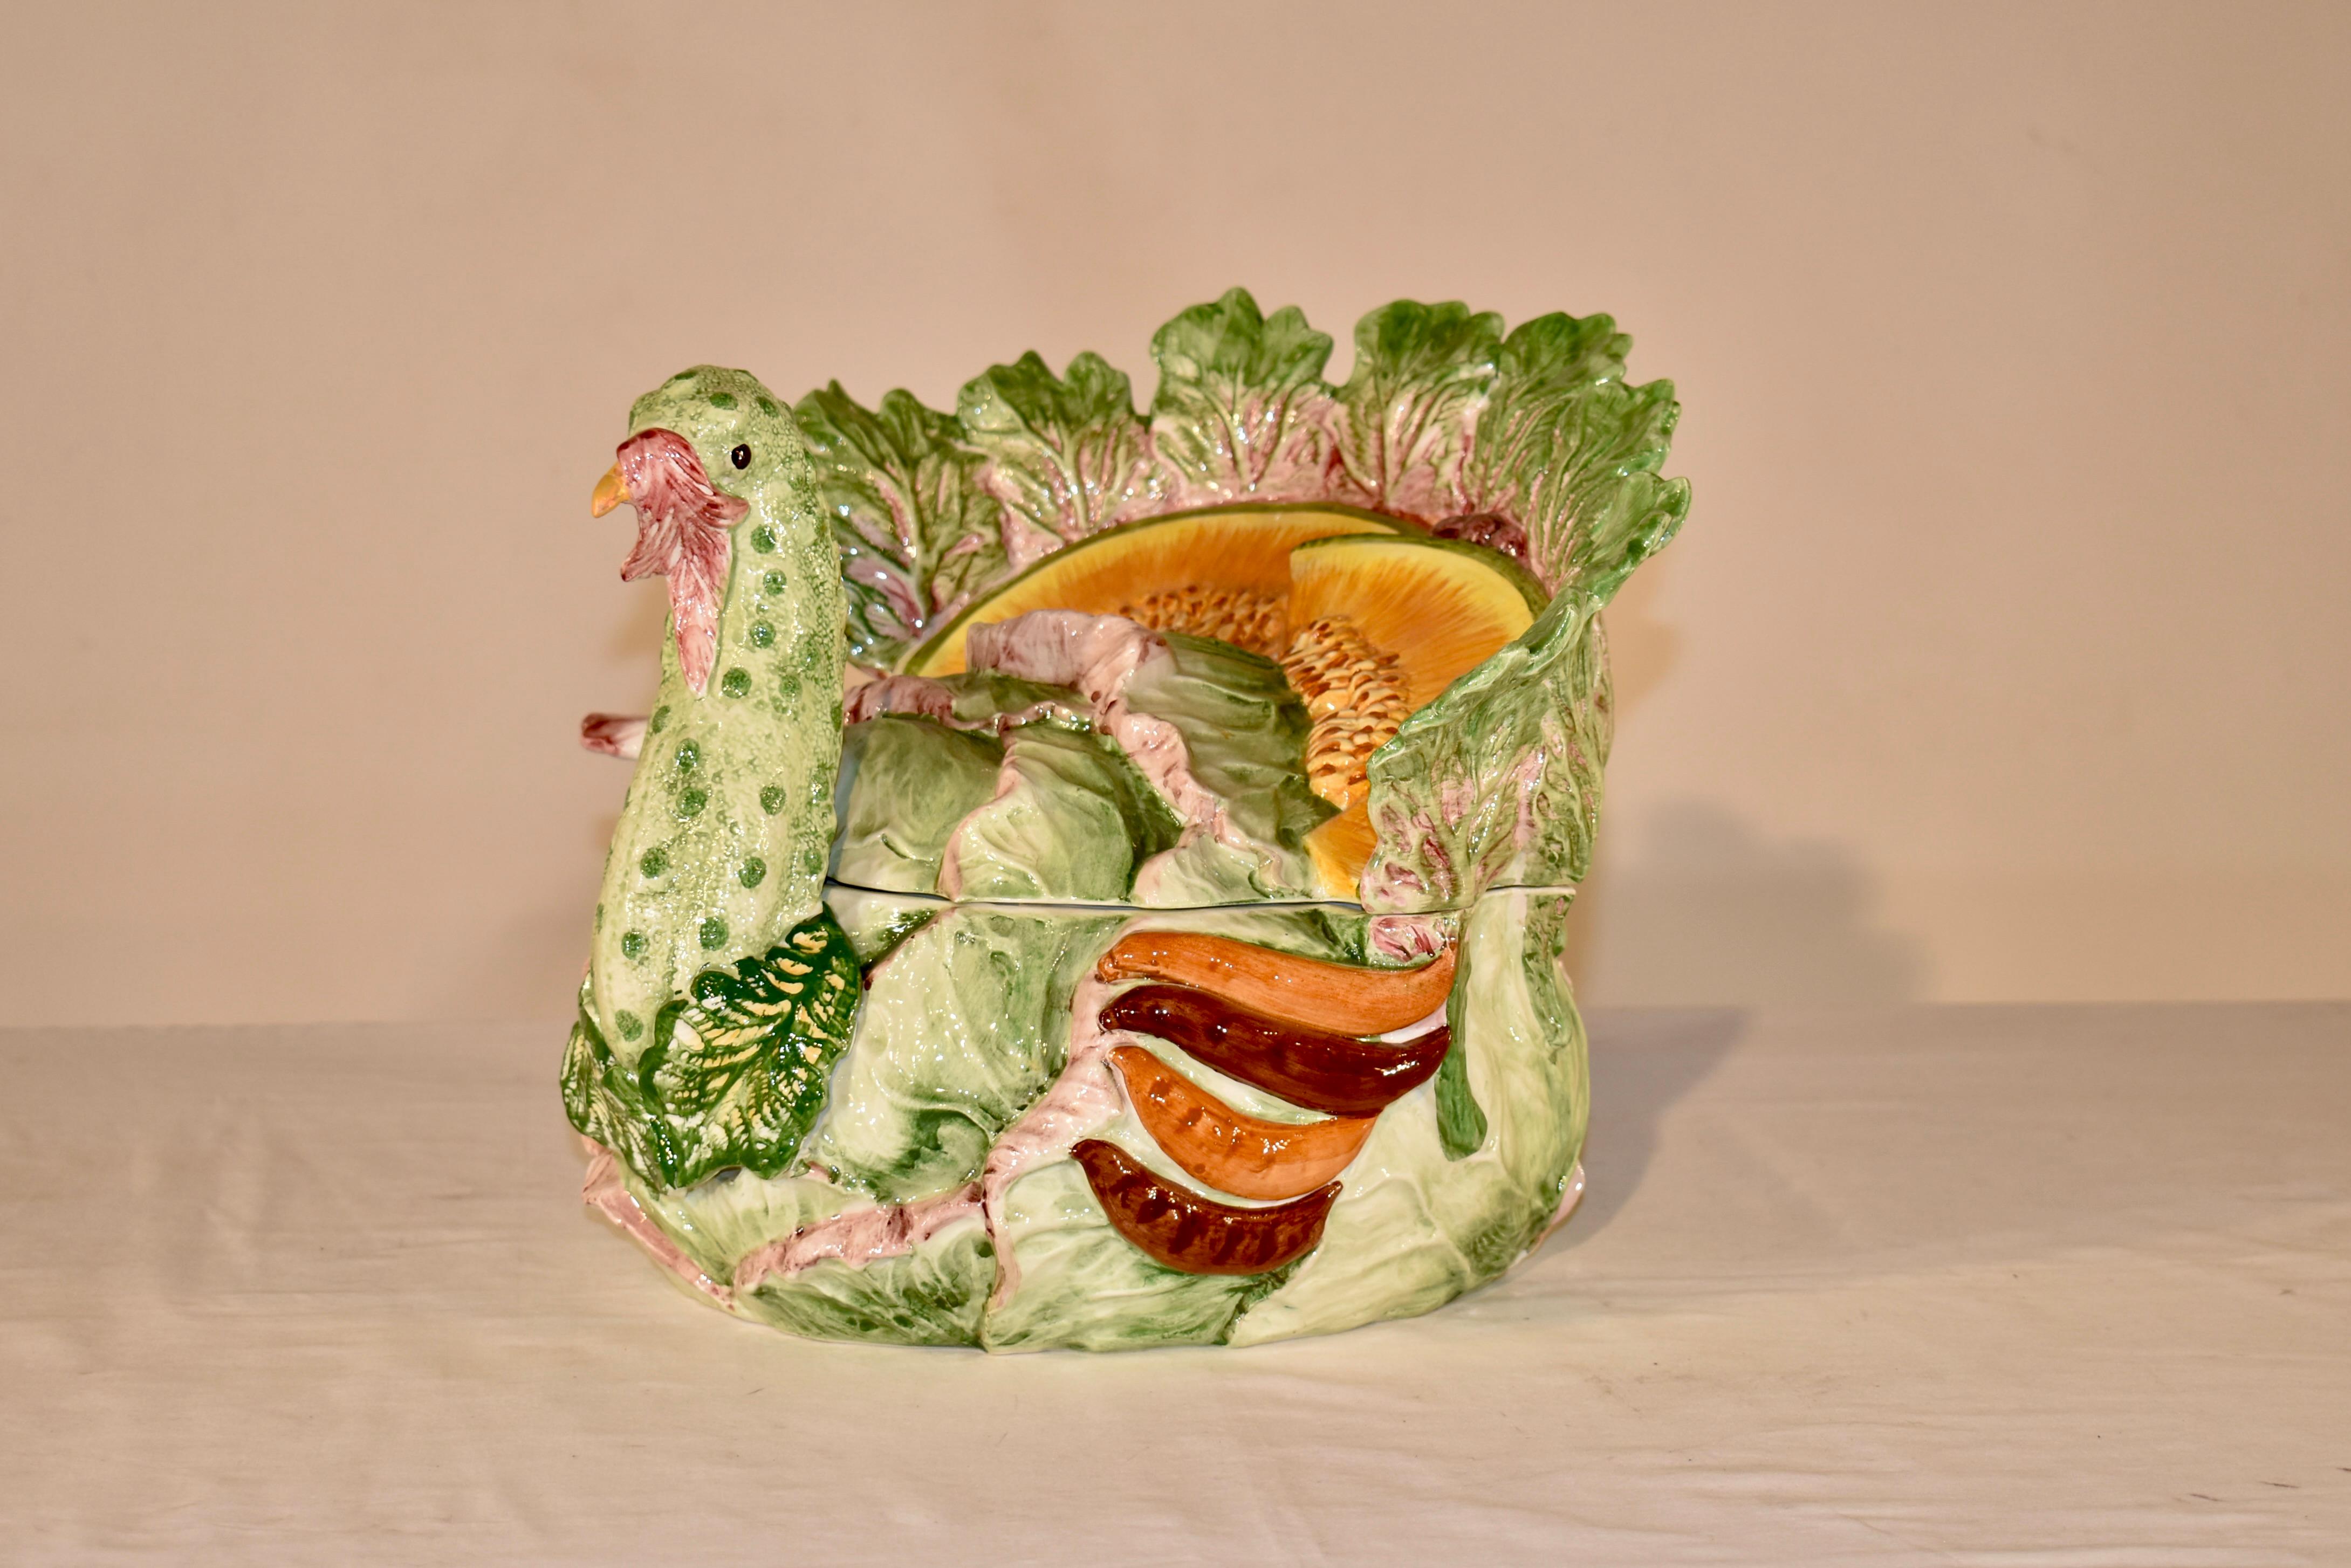 Discontinued Vietri large turkey tureen with ladle.  The turkey is made up of vegetables - cabbage and cantaloupe, peppers, etc.  This is such an interesting piece of ceramic art, which can be functional or just be used as a centerpiece.  This piece